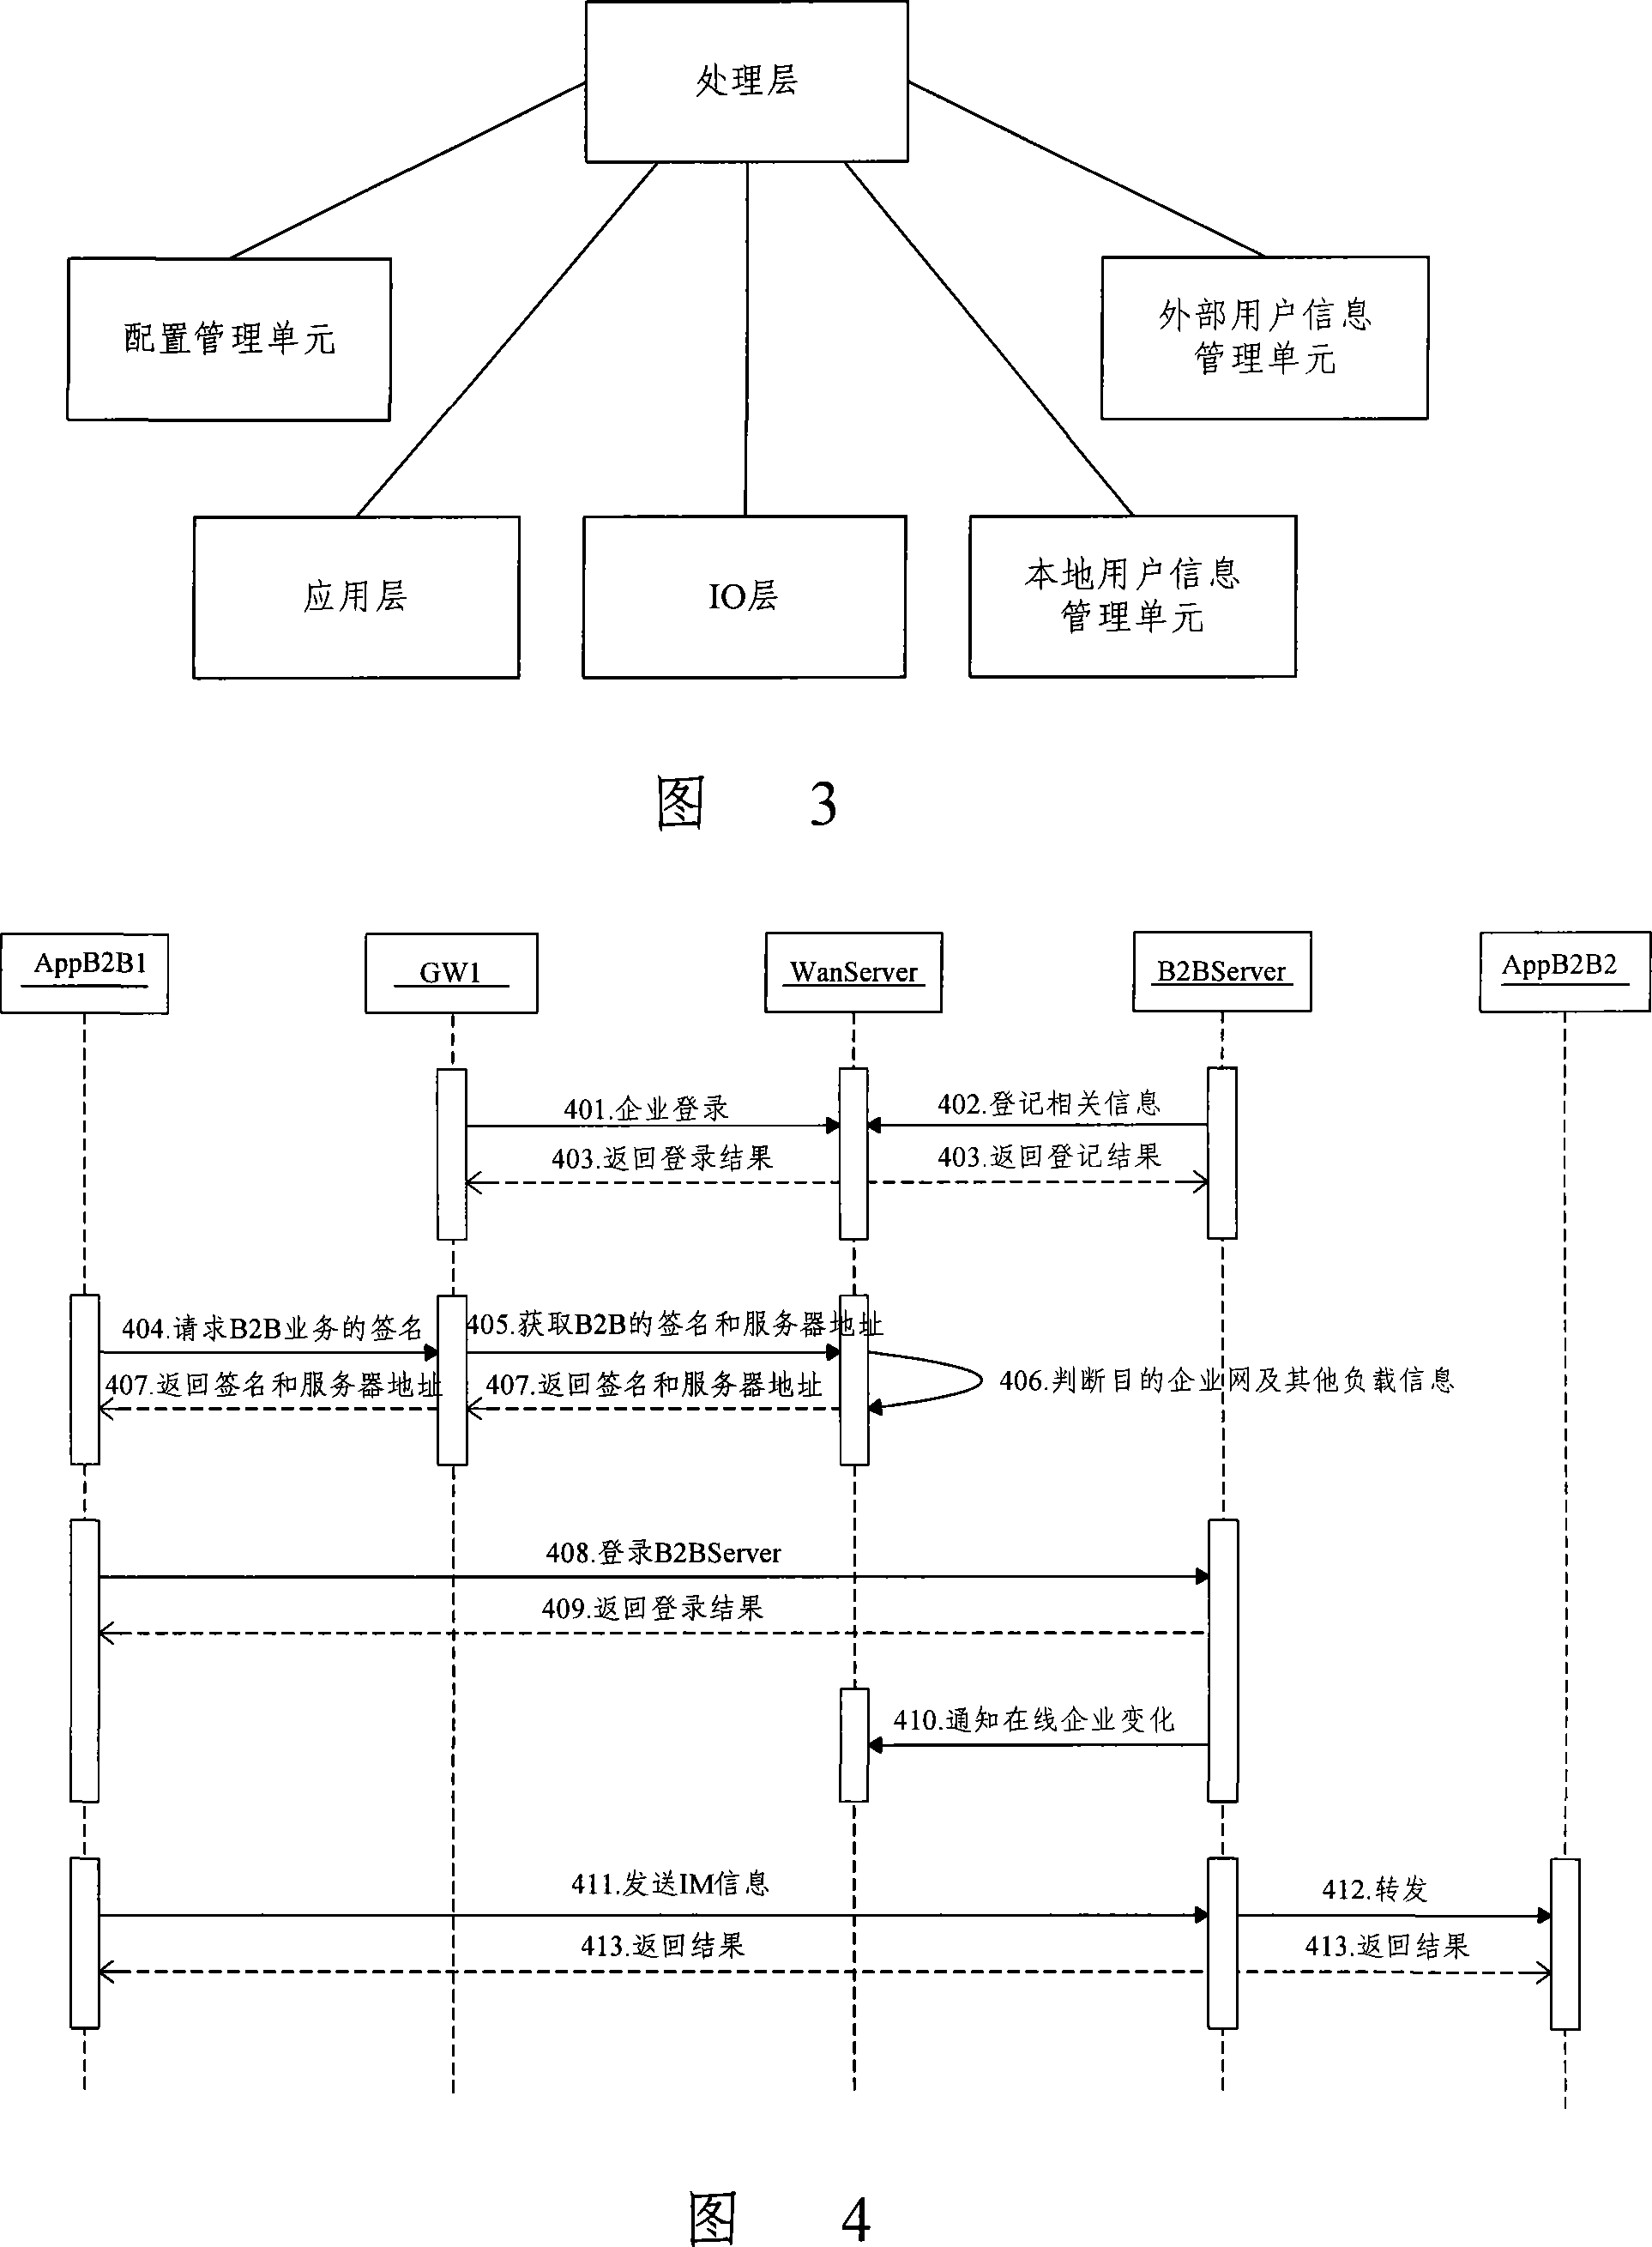 An enterprise-level instant communication interconnection system and method for realizing enterprise interconnection